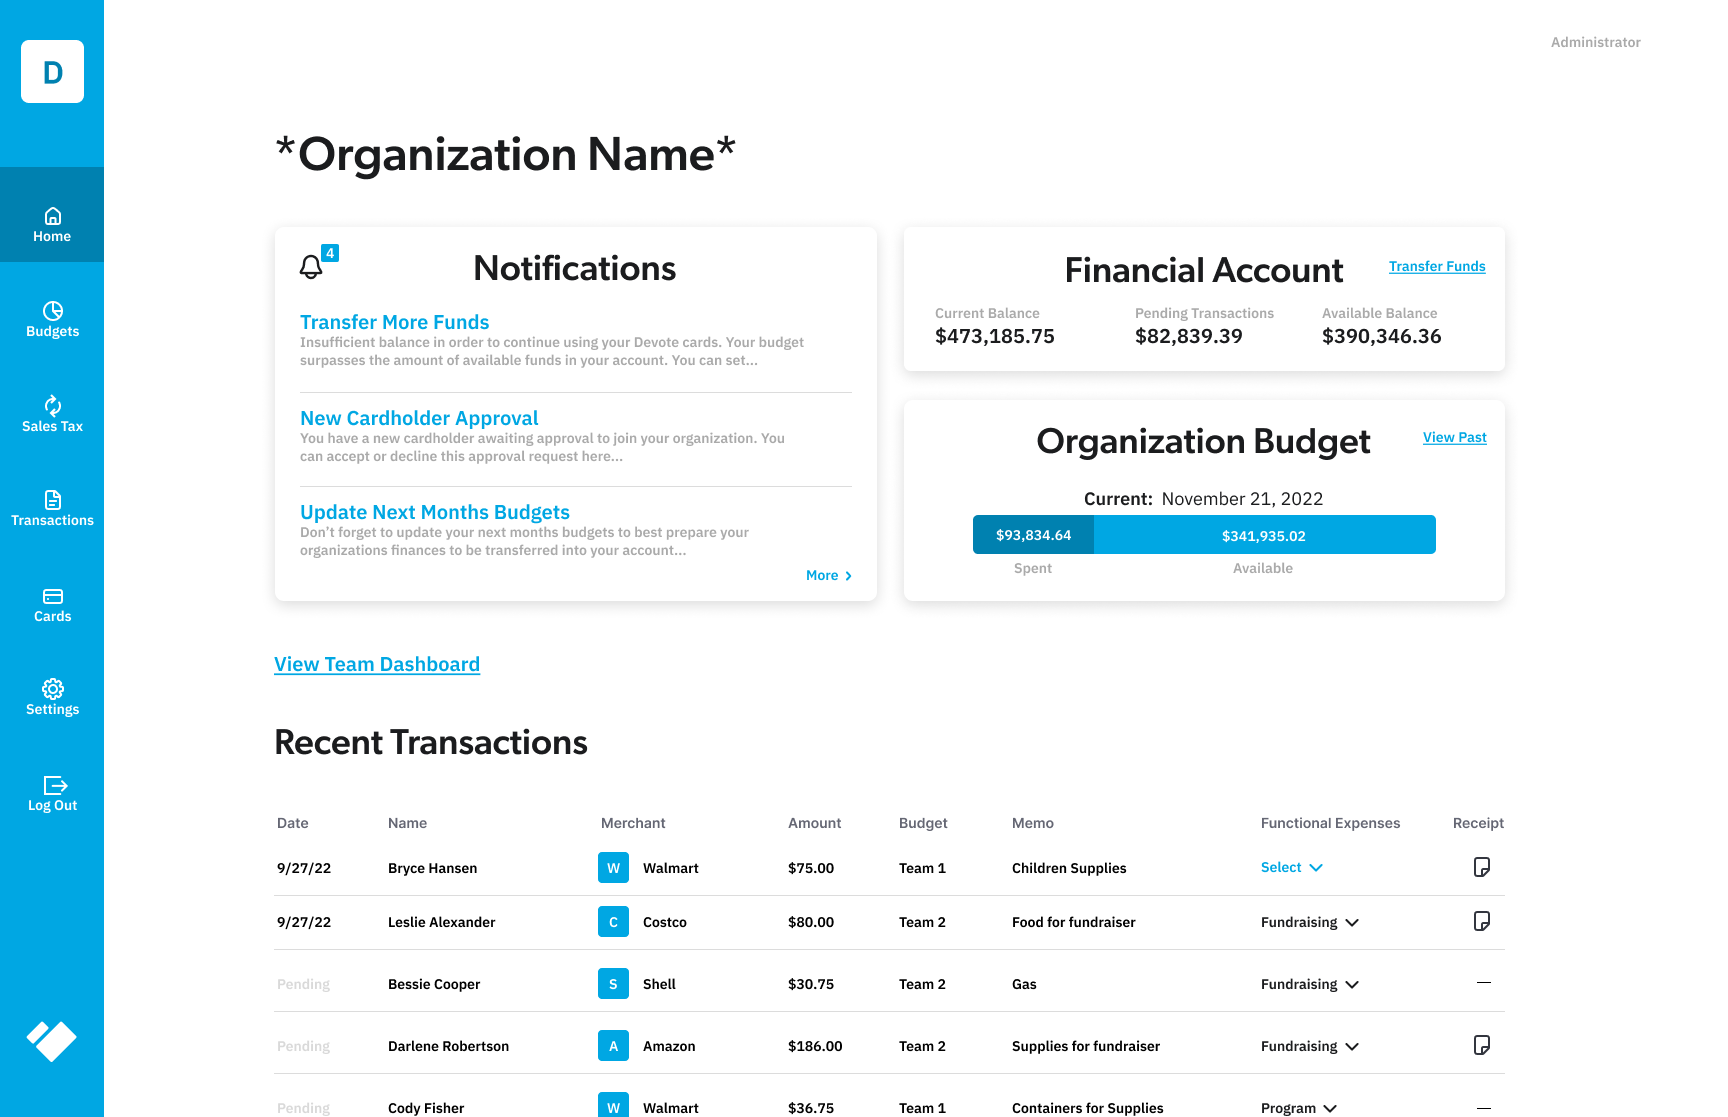 Our home dashboard for the organization. Where some of the most important information can be found.